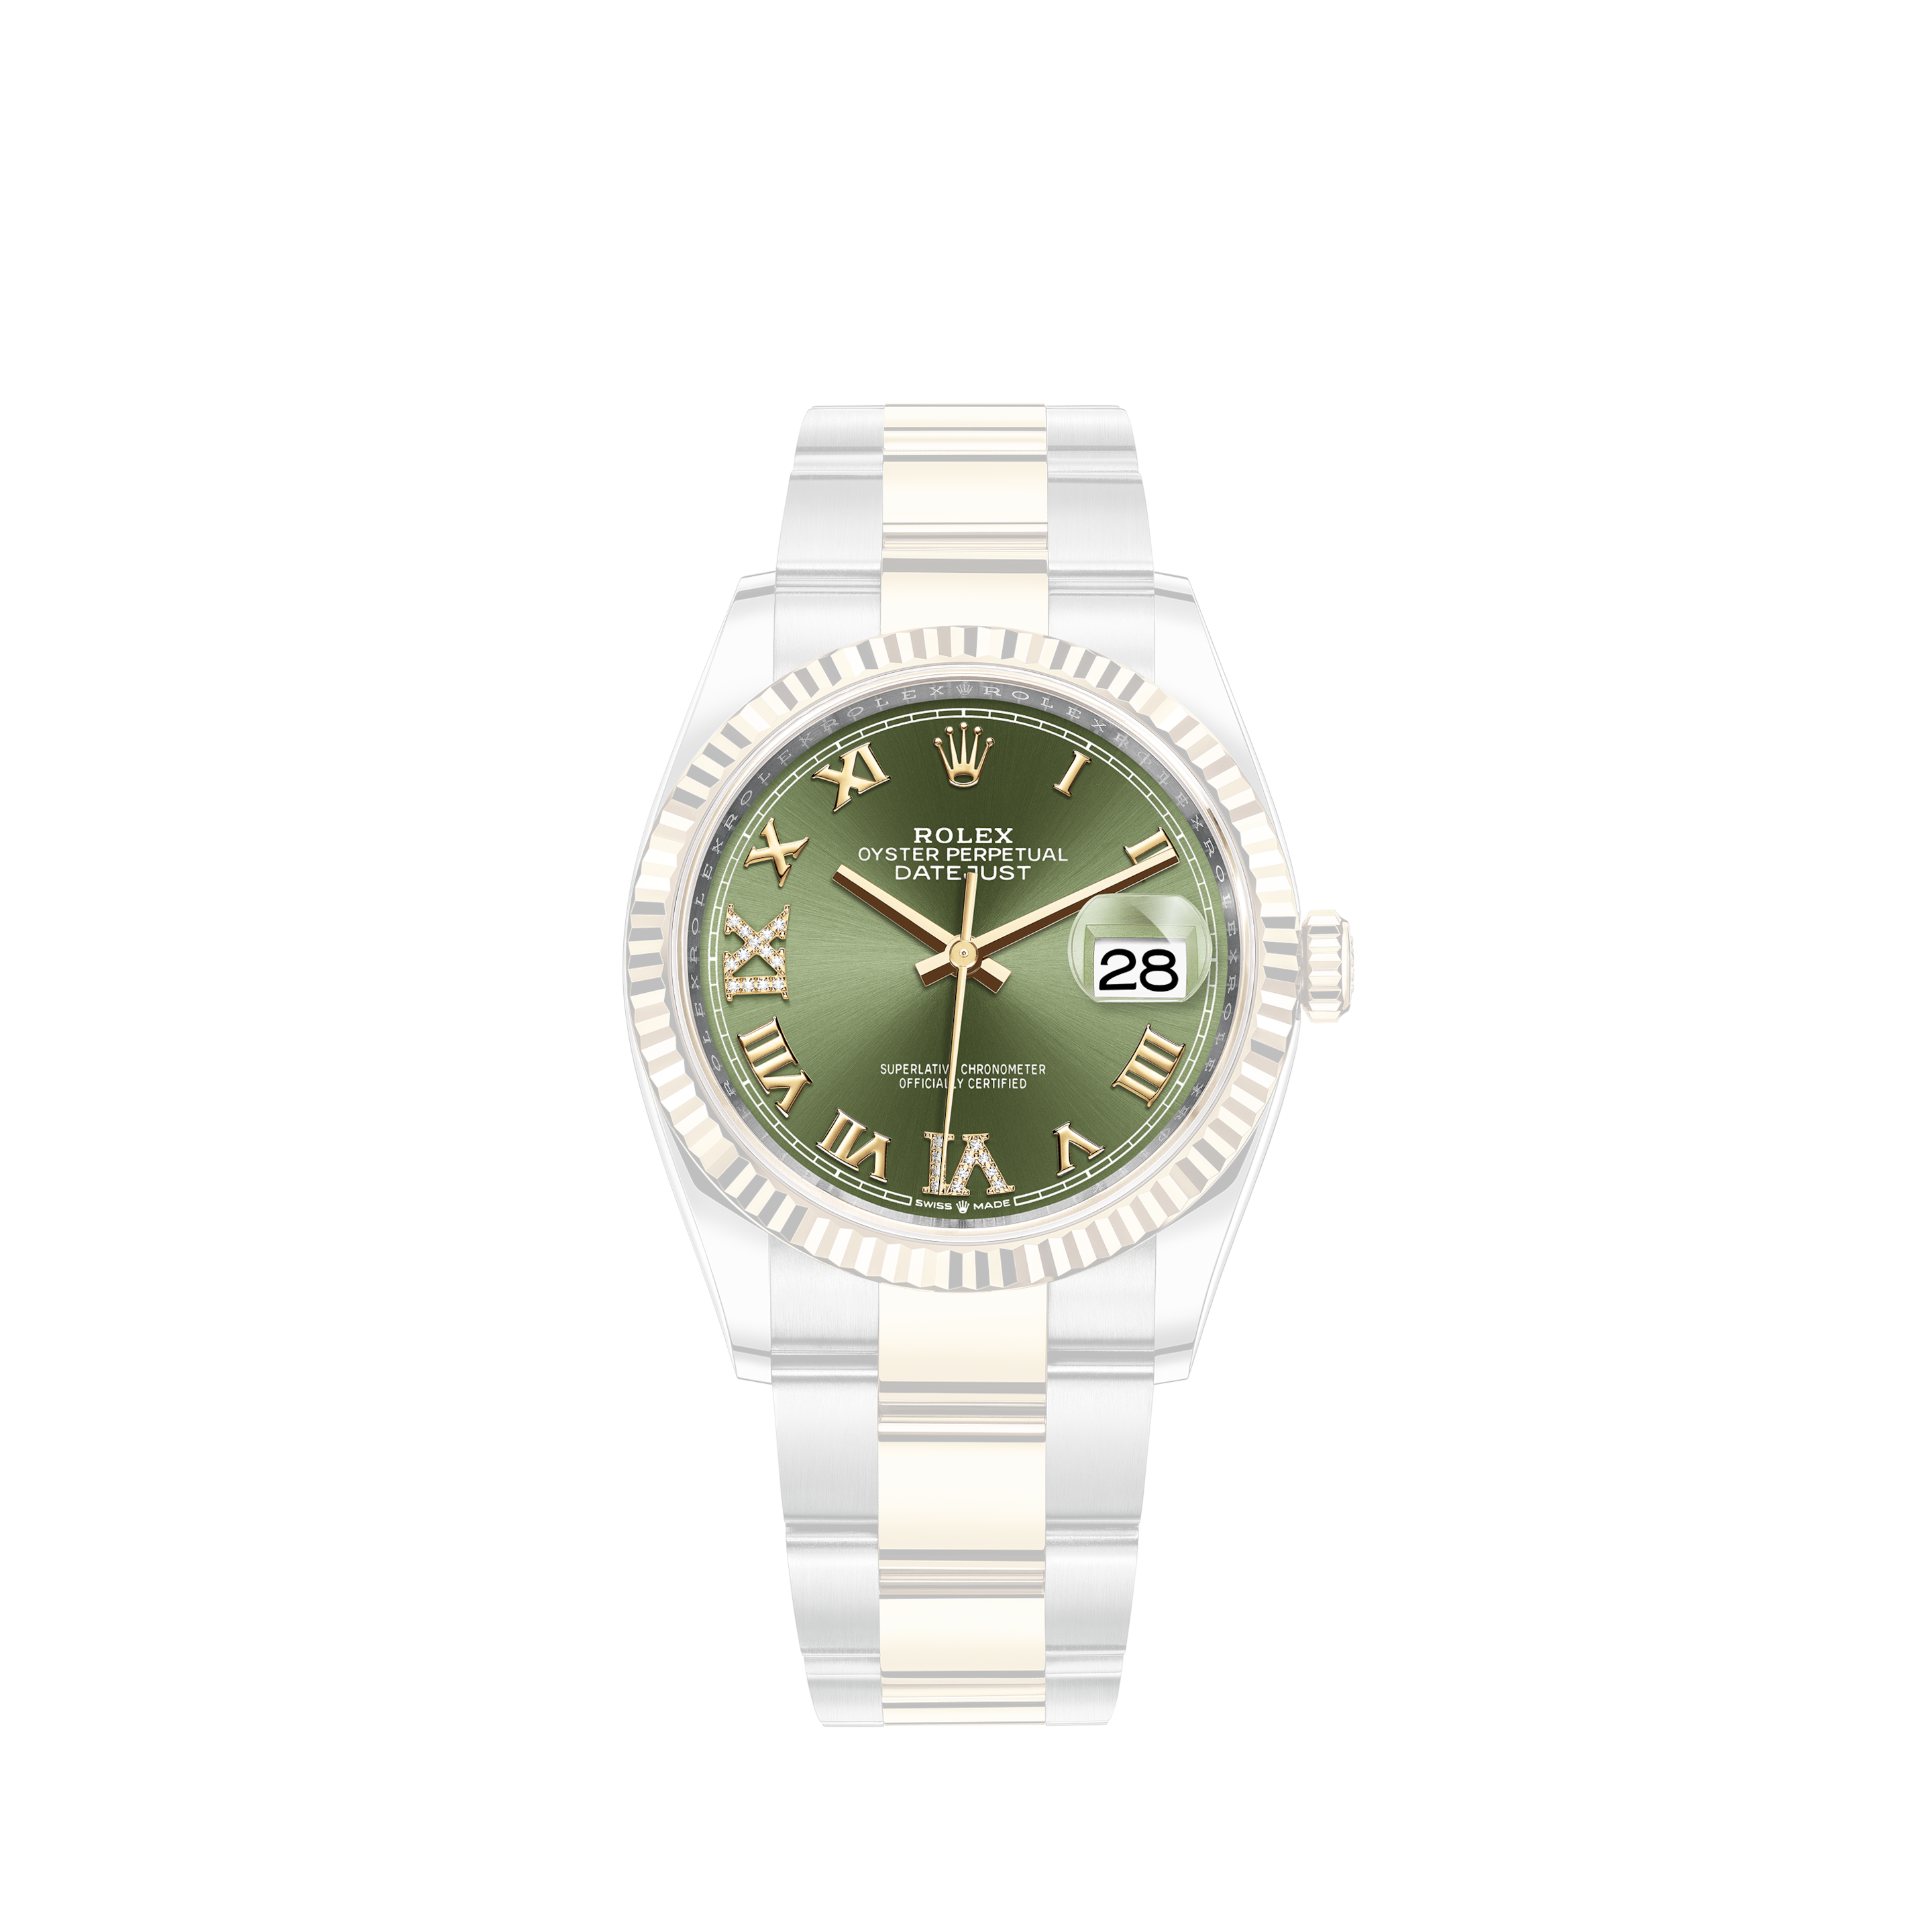 Rolex W- Name Nick Price Limited Edition 200Pcs